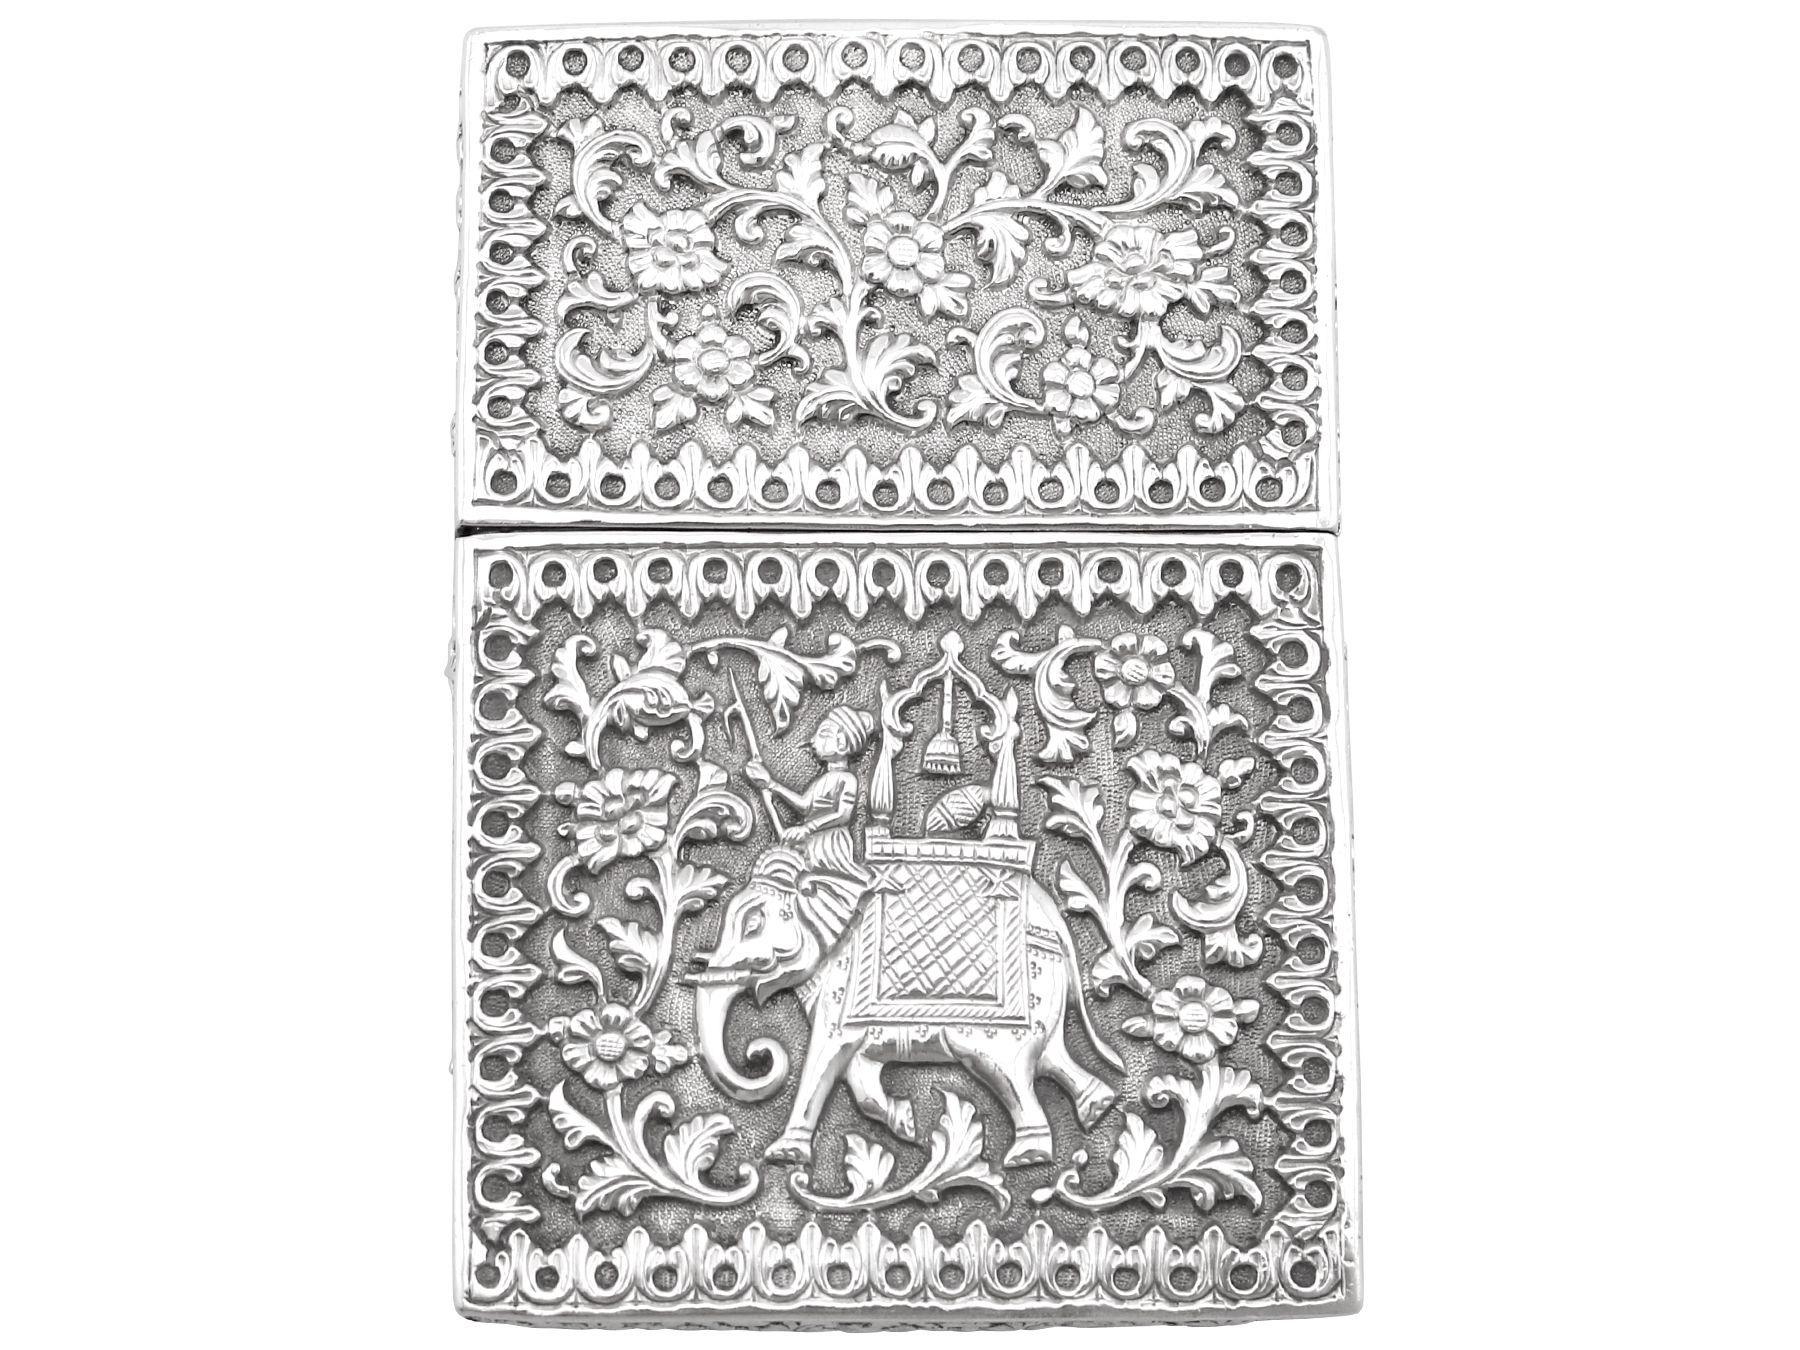 An exceptional, fine and impressive antique Indian silver card case; an addition to our diverse Asian silverware collection.

This exceptional antique Indian silver card case has a shaped rectangular form.

The surface of this case is